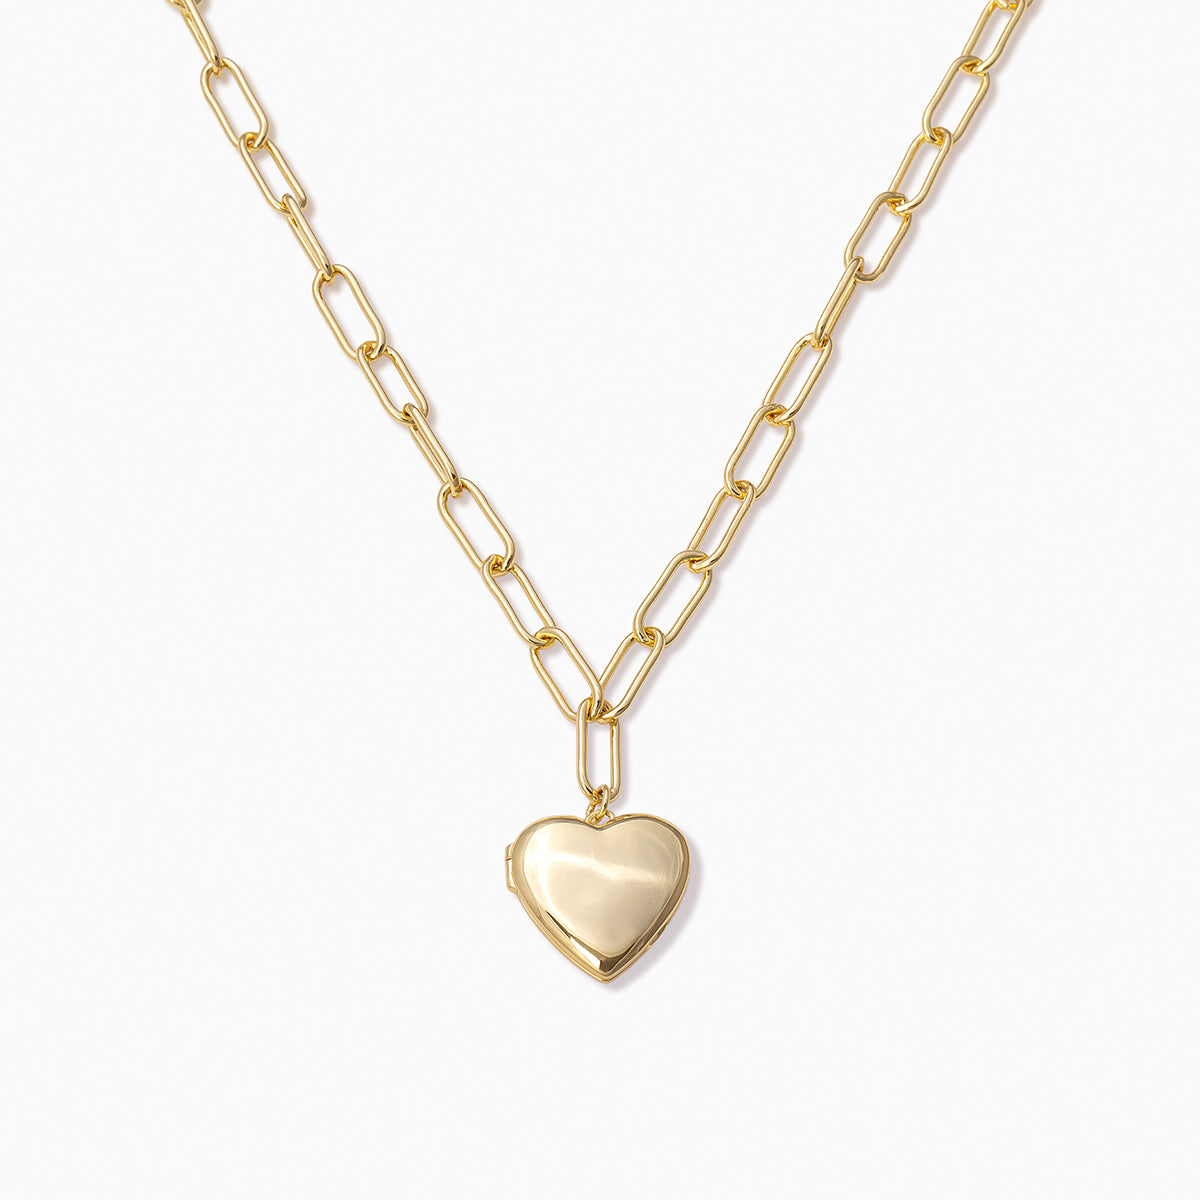 Heart Locket Necklace | Gold | Product Image | Uncommon James